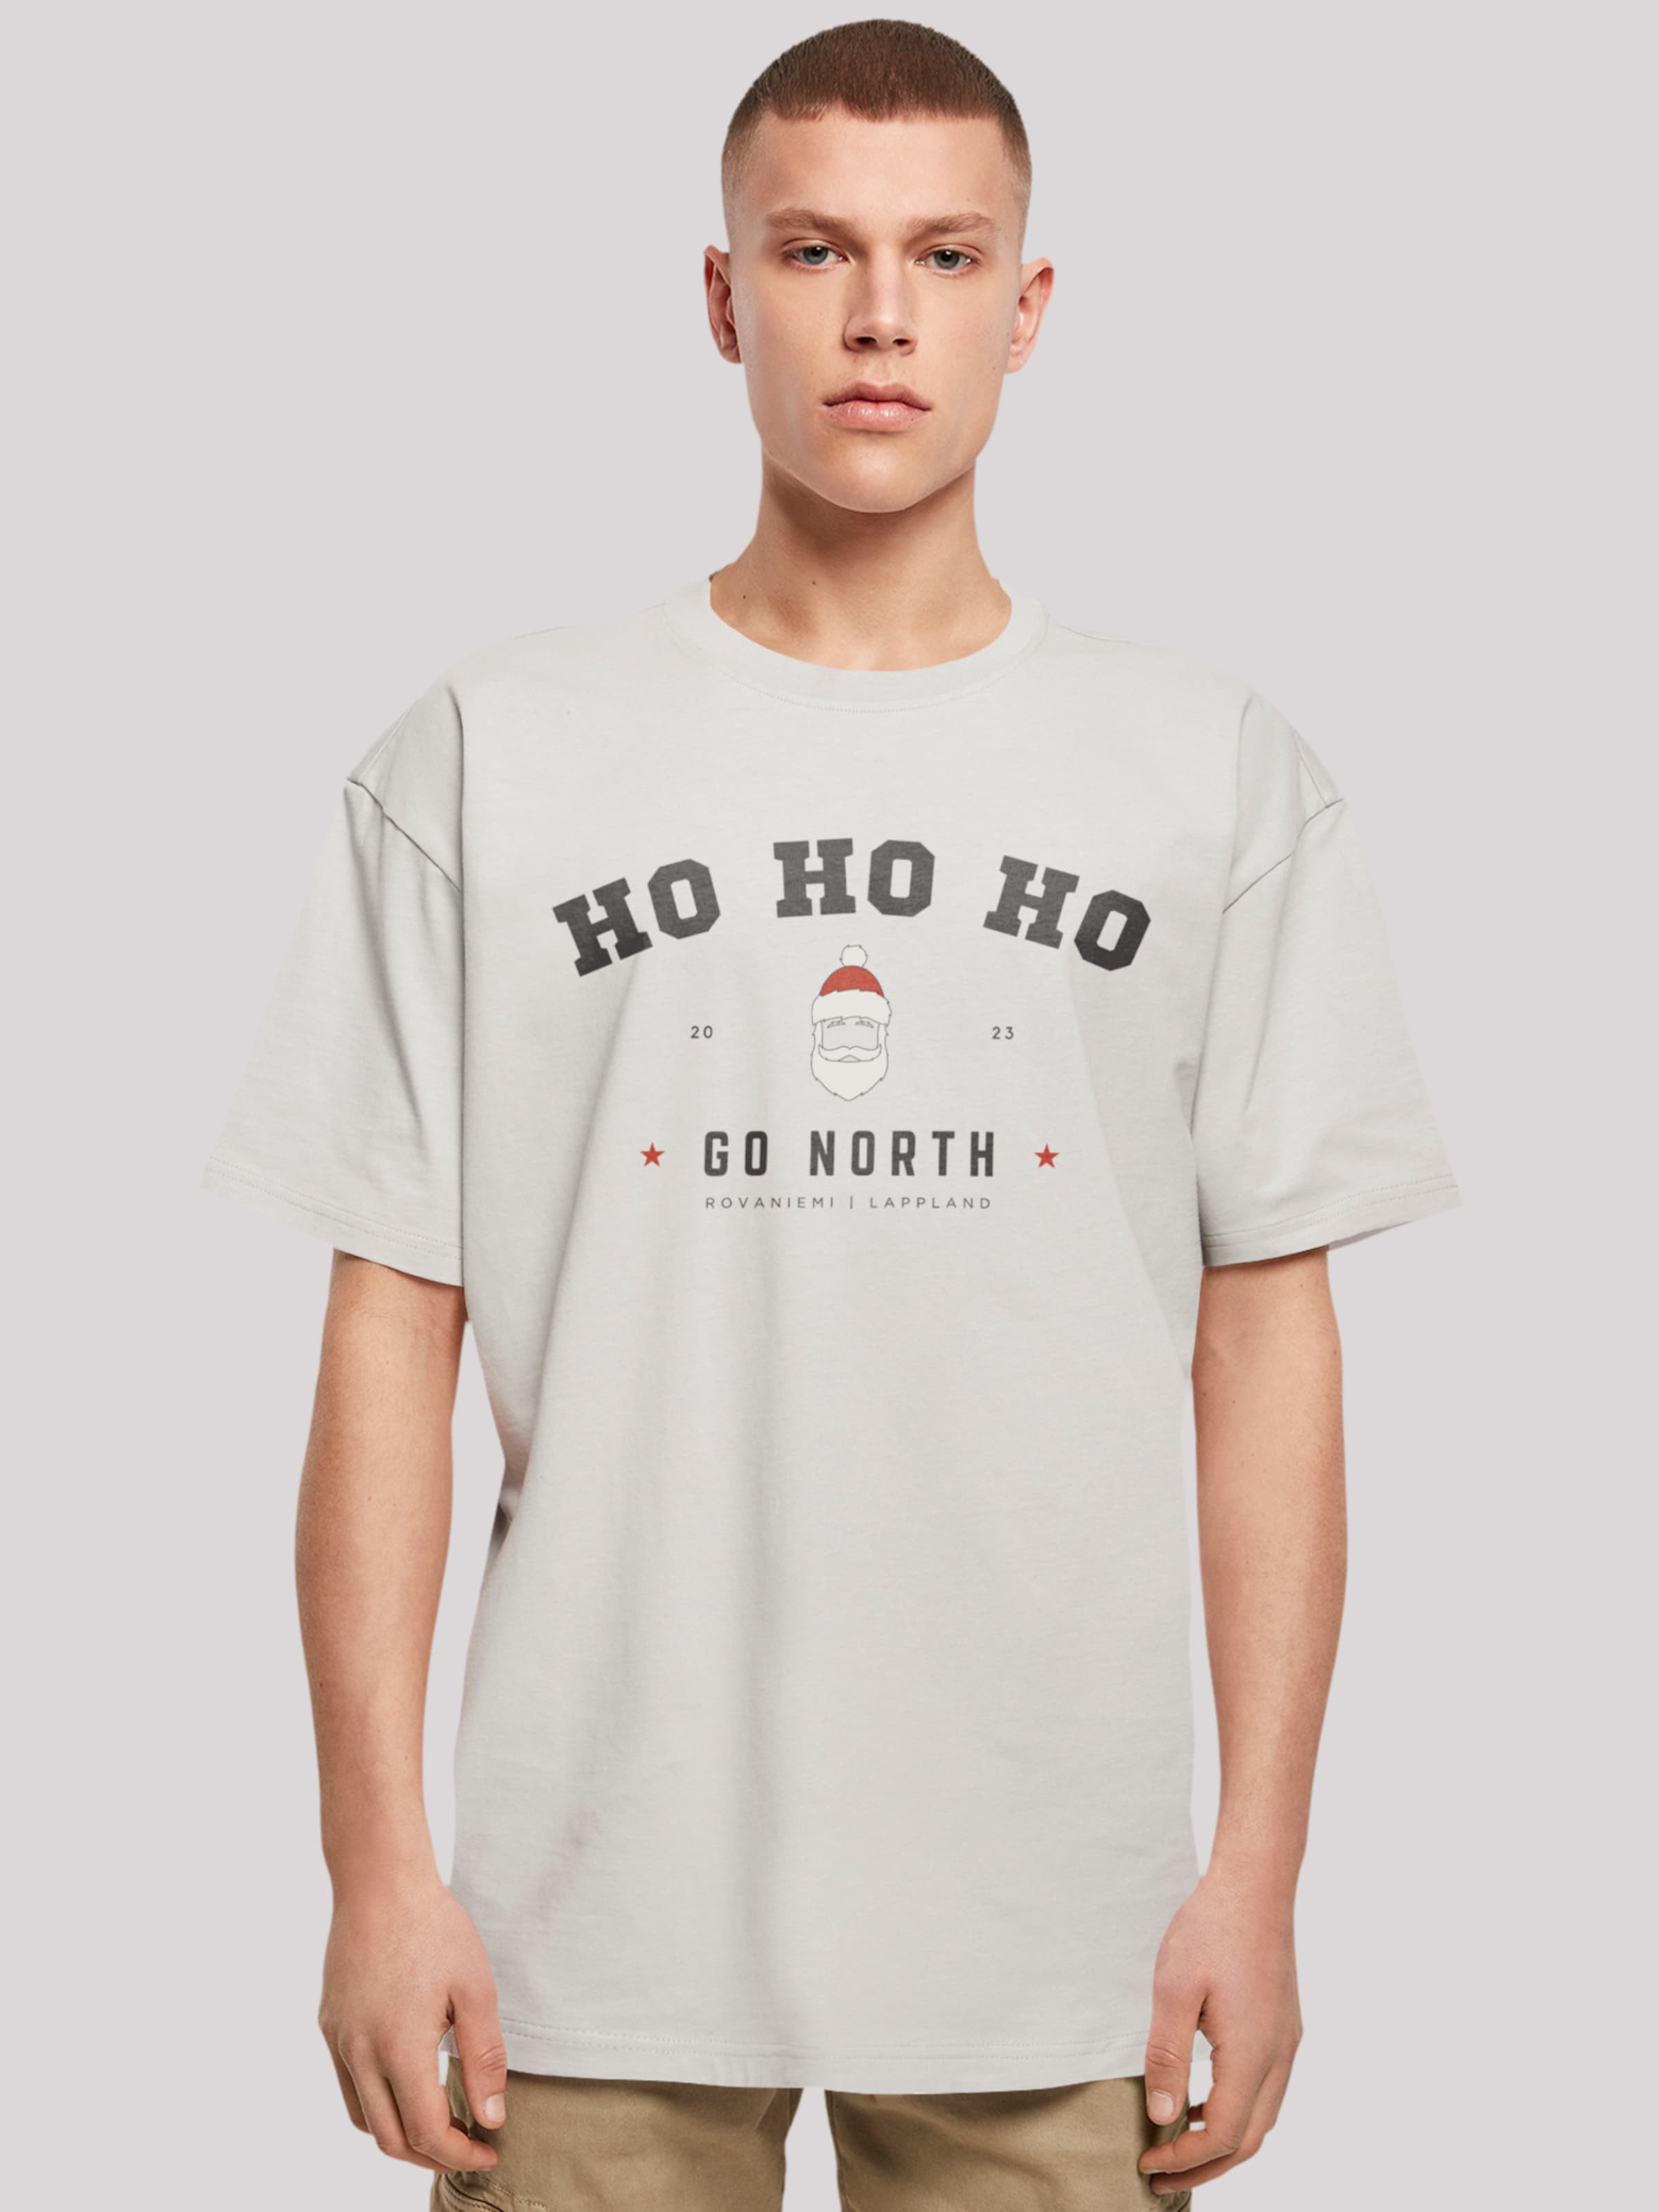 Claus\' Grey Santa Shirt Ho in Ho ABOUT \'Ho Light F4NT4STIC YOU |